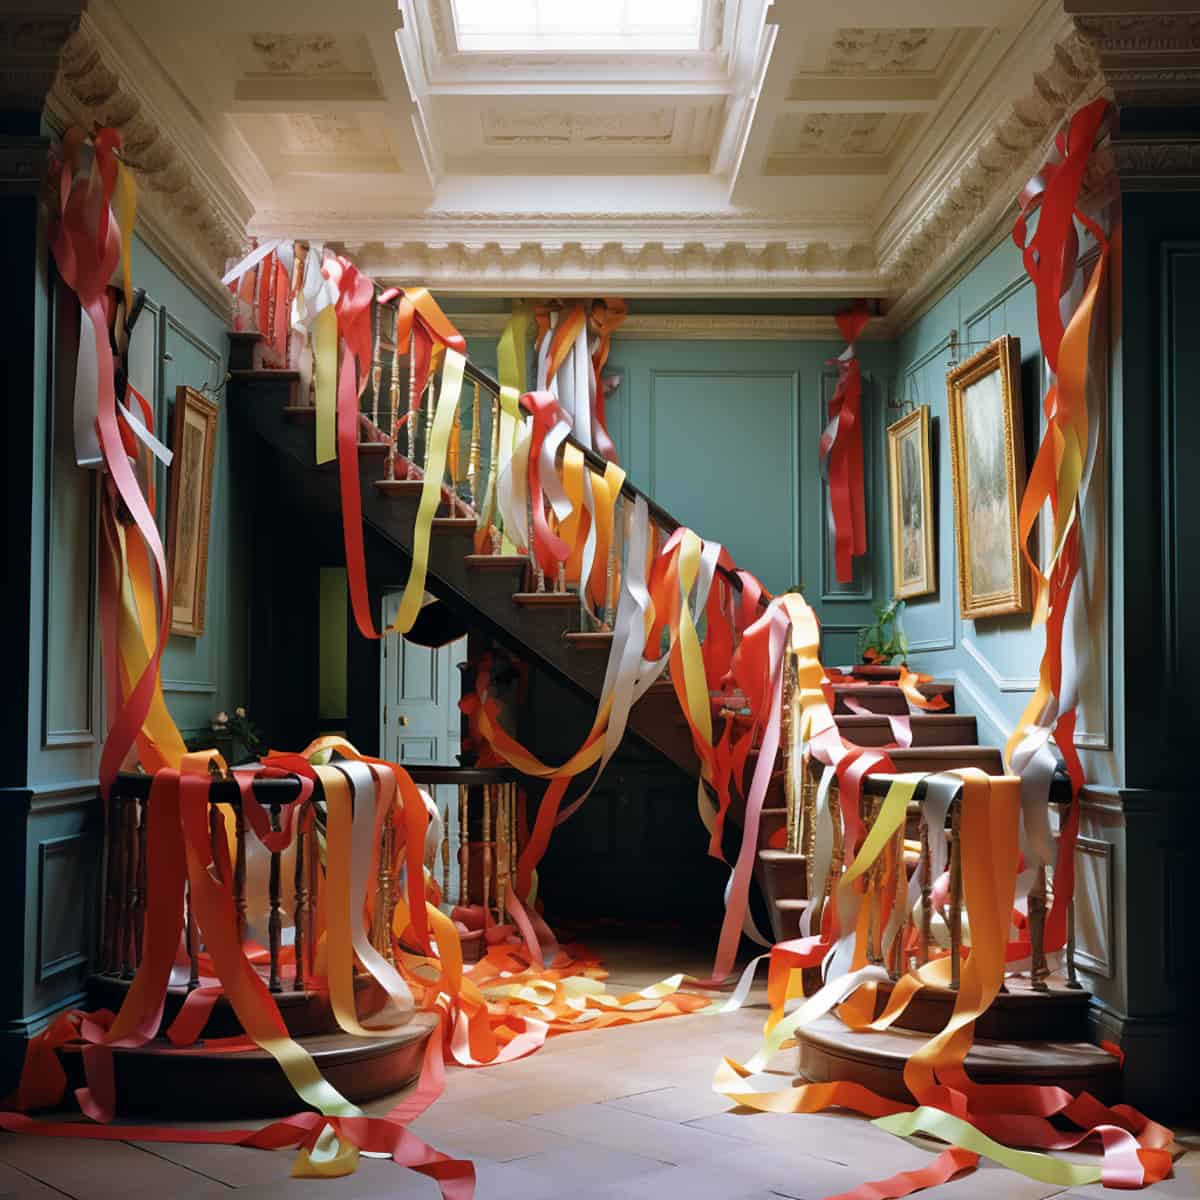 Ribbons on staircase